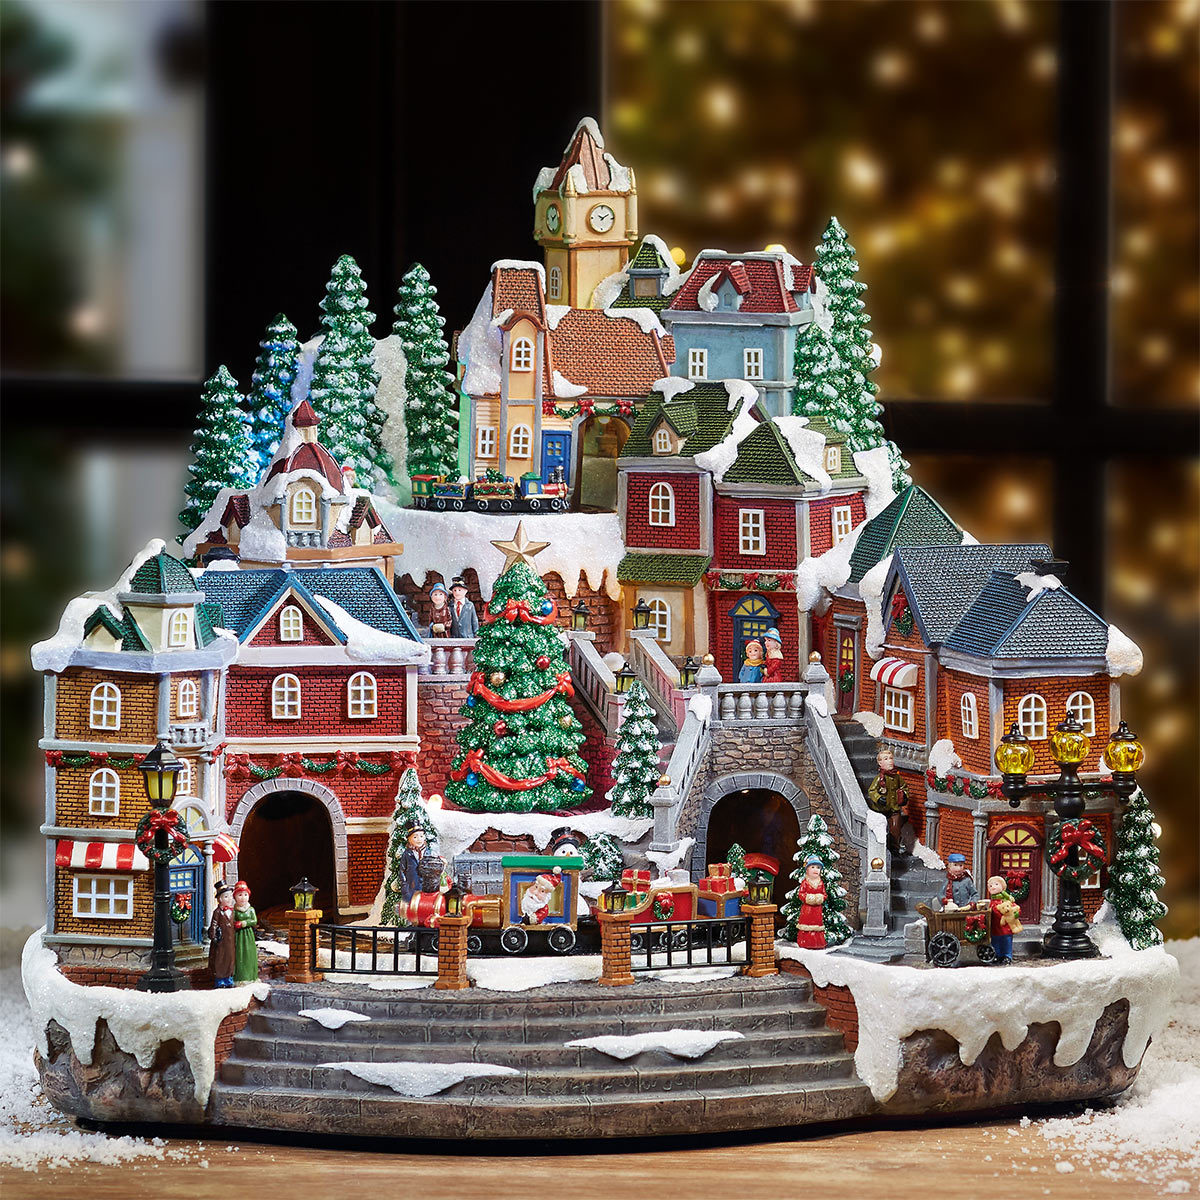  Inch (37 cm) Animated LED Winter Village Scene with ...